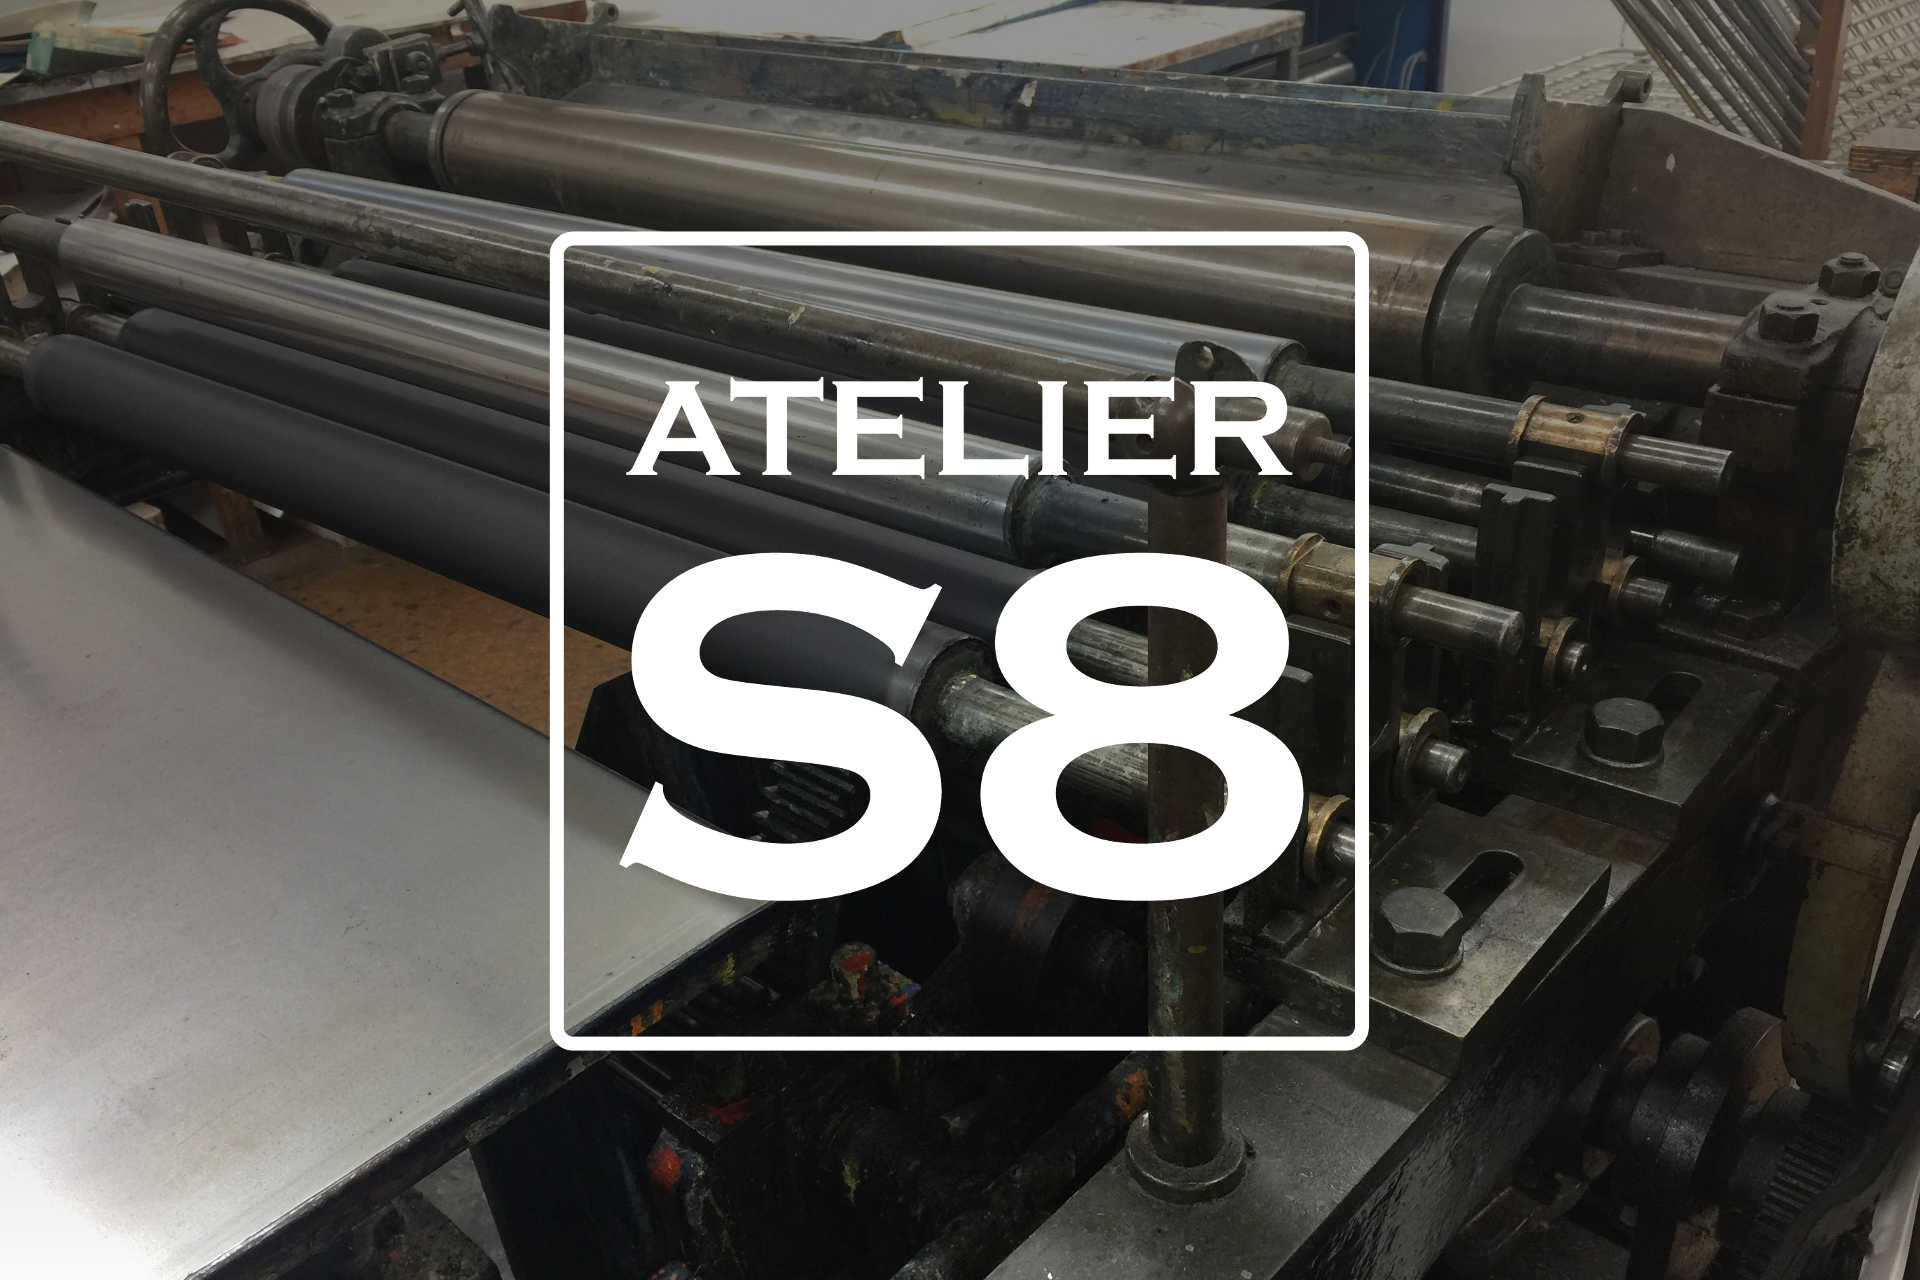 Atelier S8 logo with press rollers background